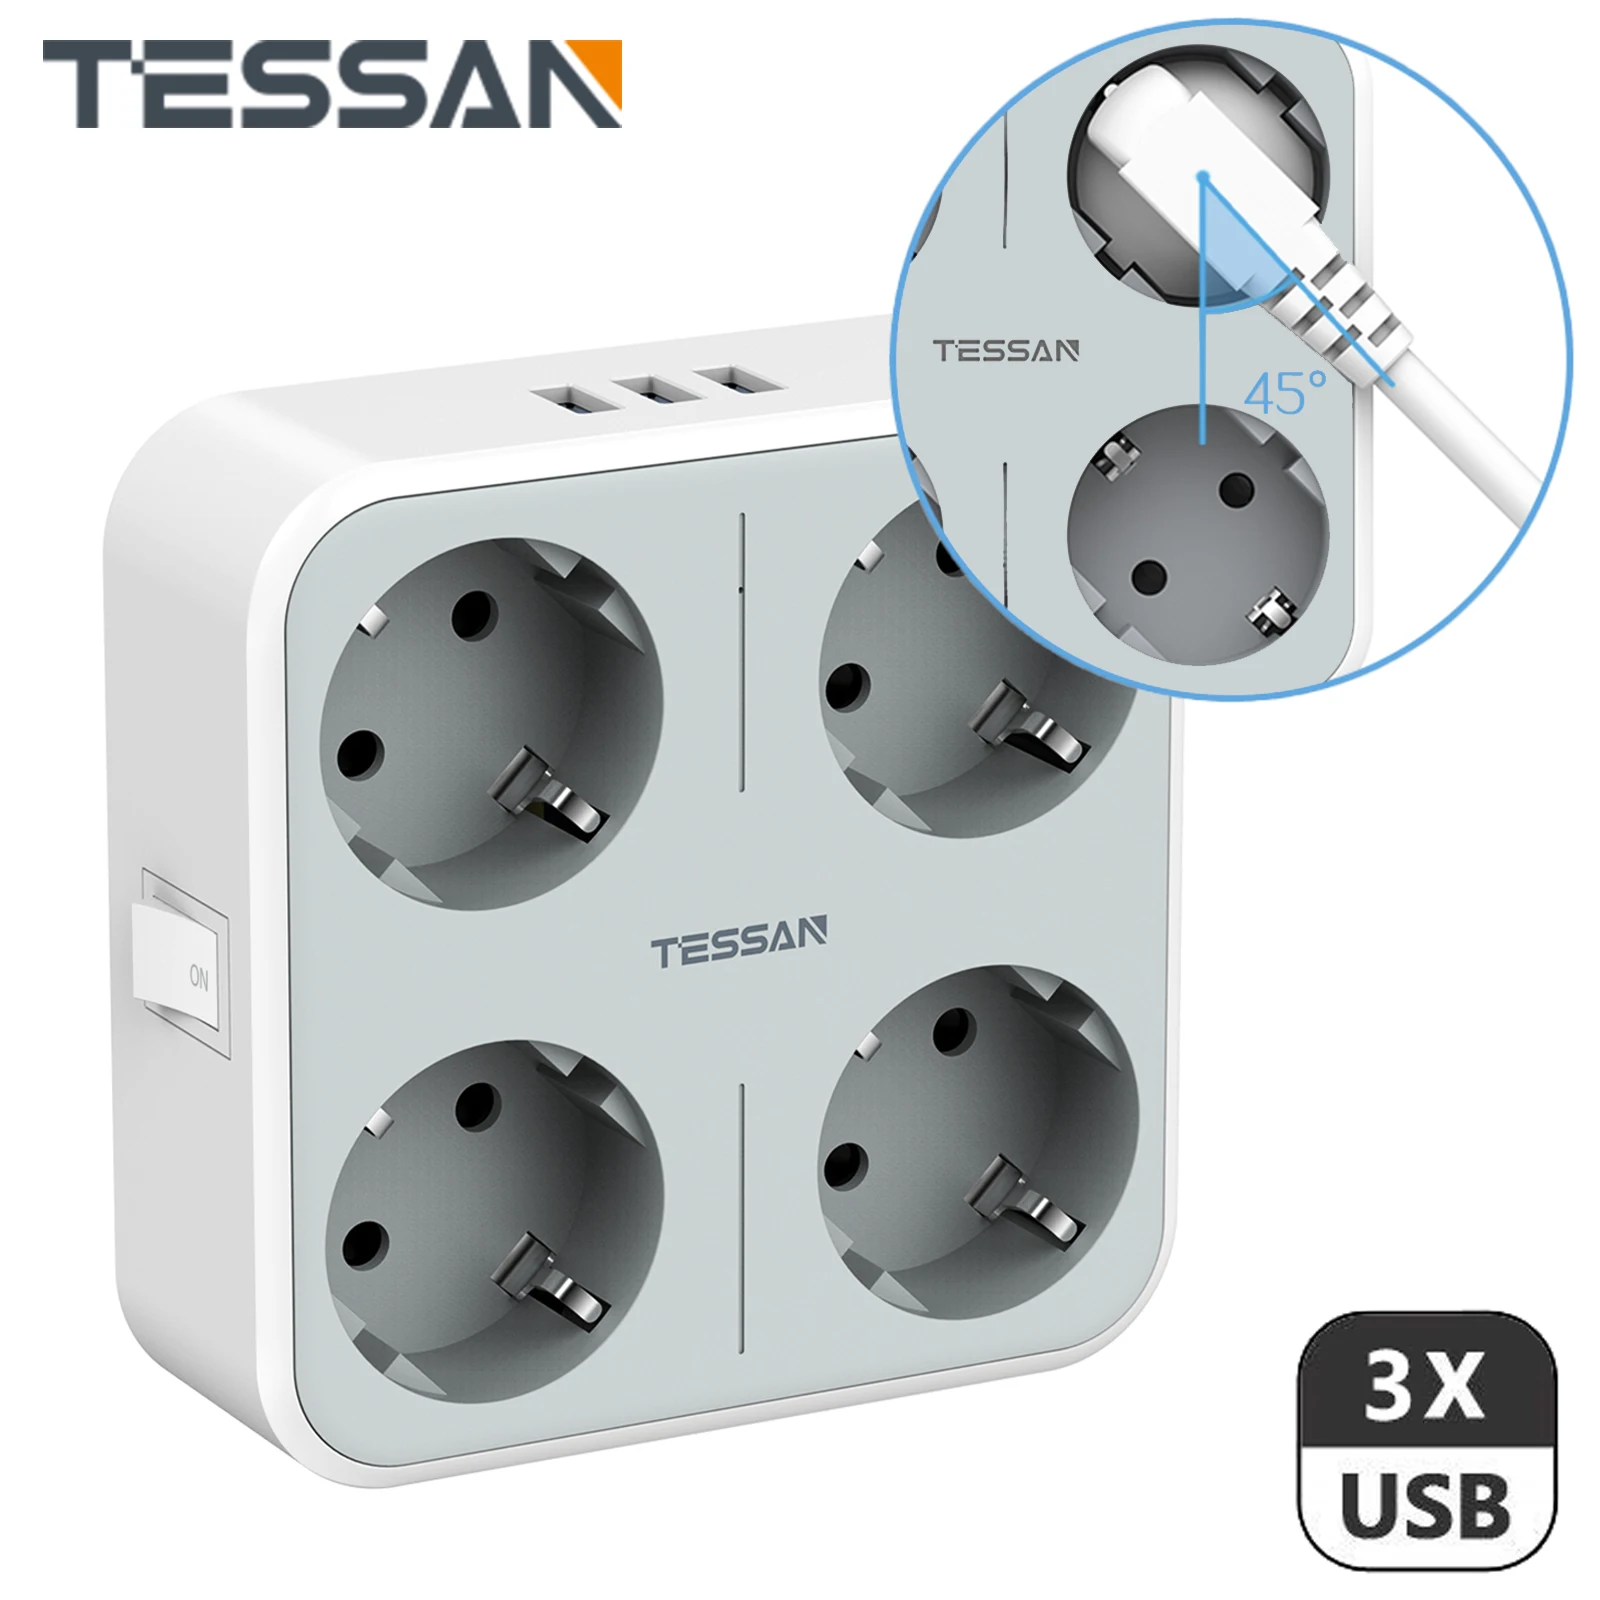 TESSAN 1/4-Way Outlets Power Strip with 2/3 USB Ports (5V/2.4A) & On/Off Switch, EU Wall Socket Extender for Smartphone, Laptop